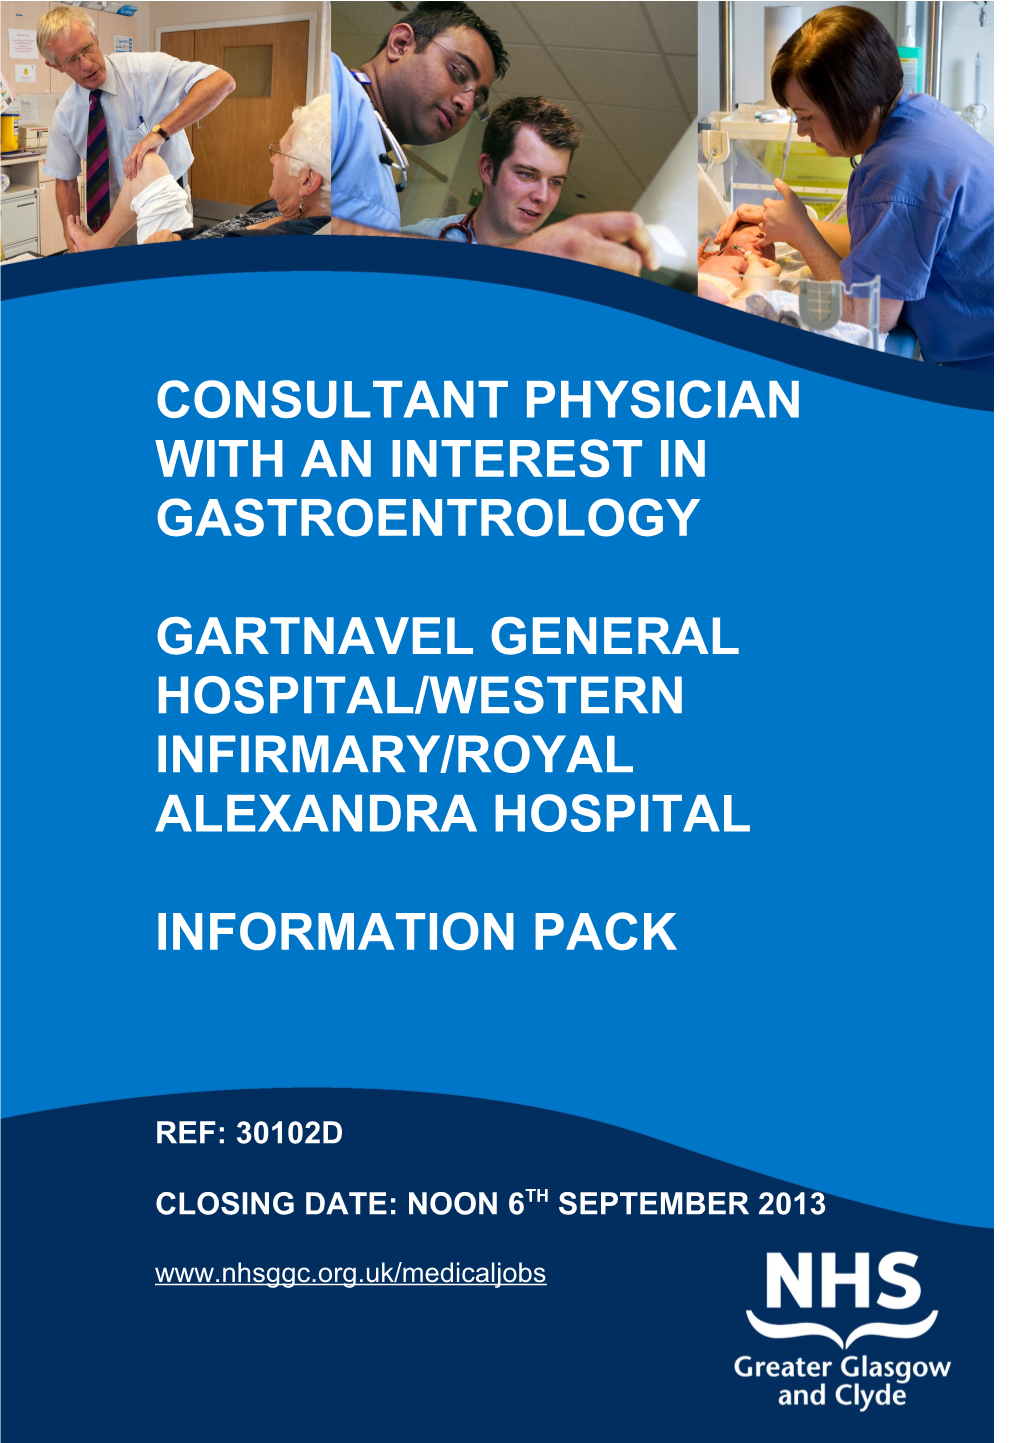 Consultant Physician with an Interest in Gastroentrology